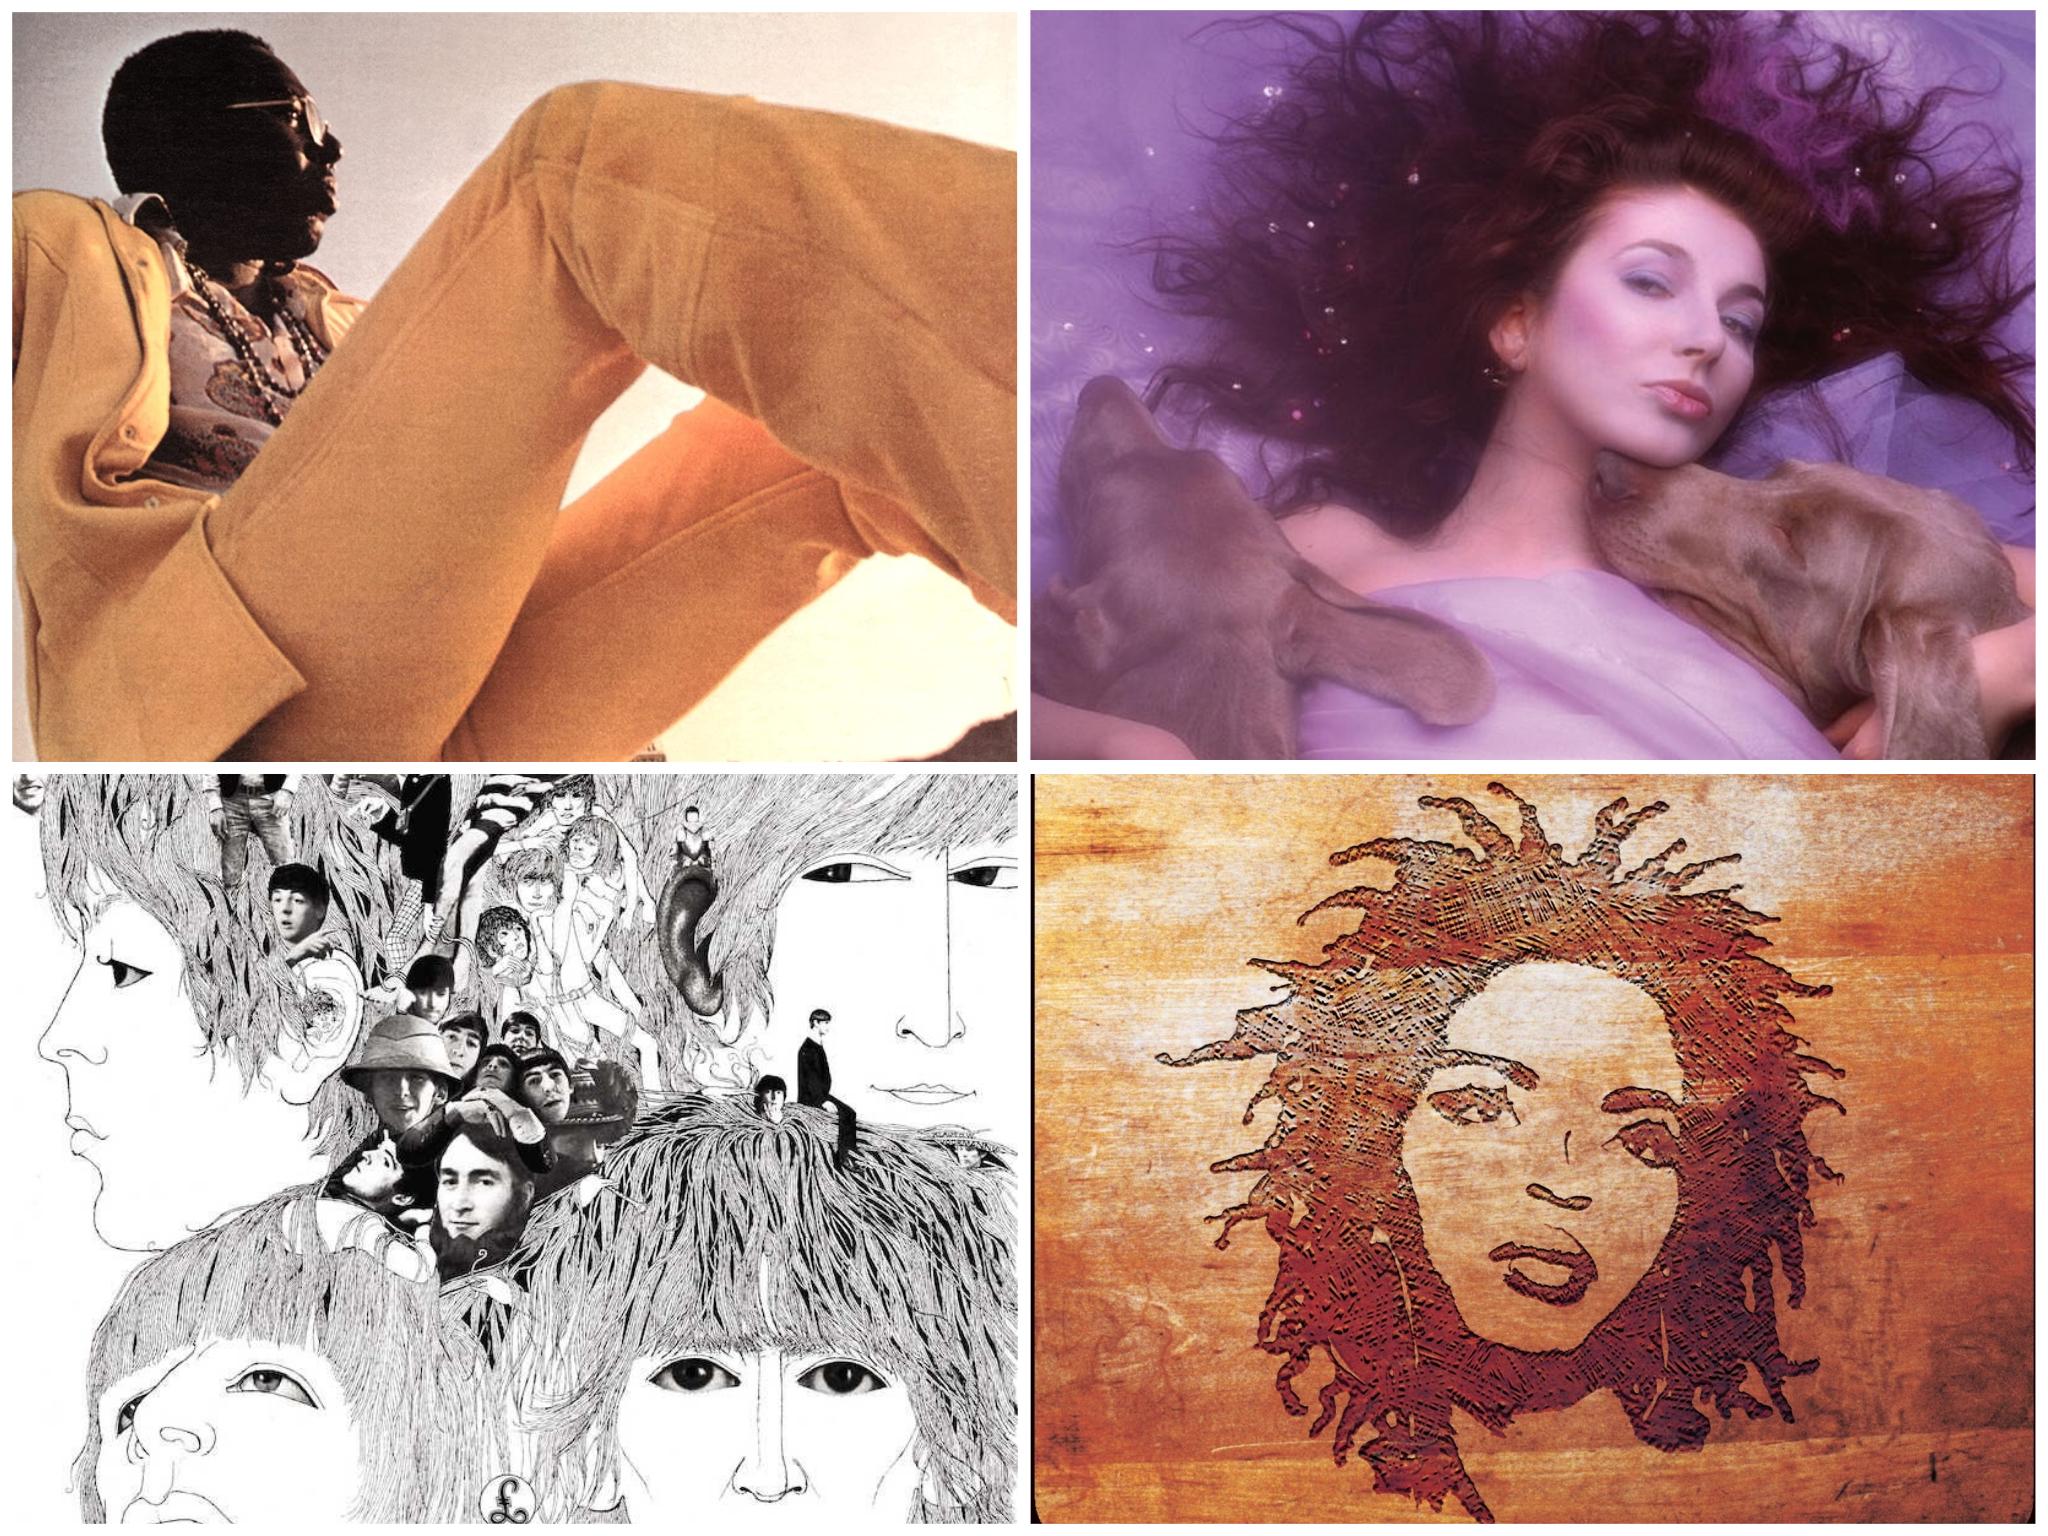 Coronavirus: The 39 best albums to listen to while you're self-isolating